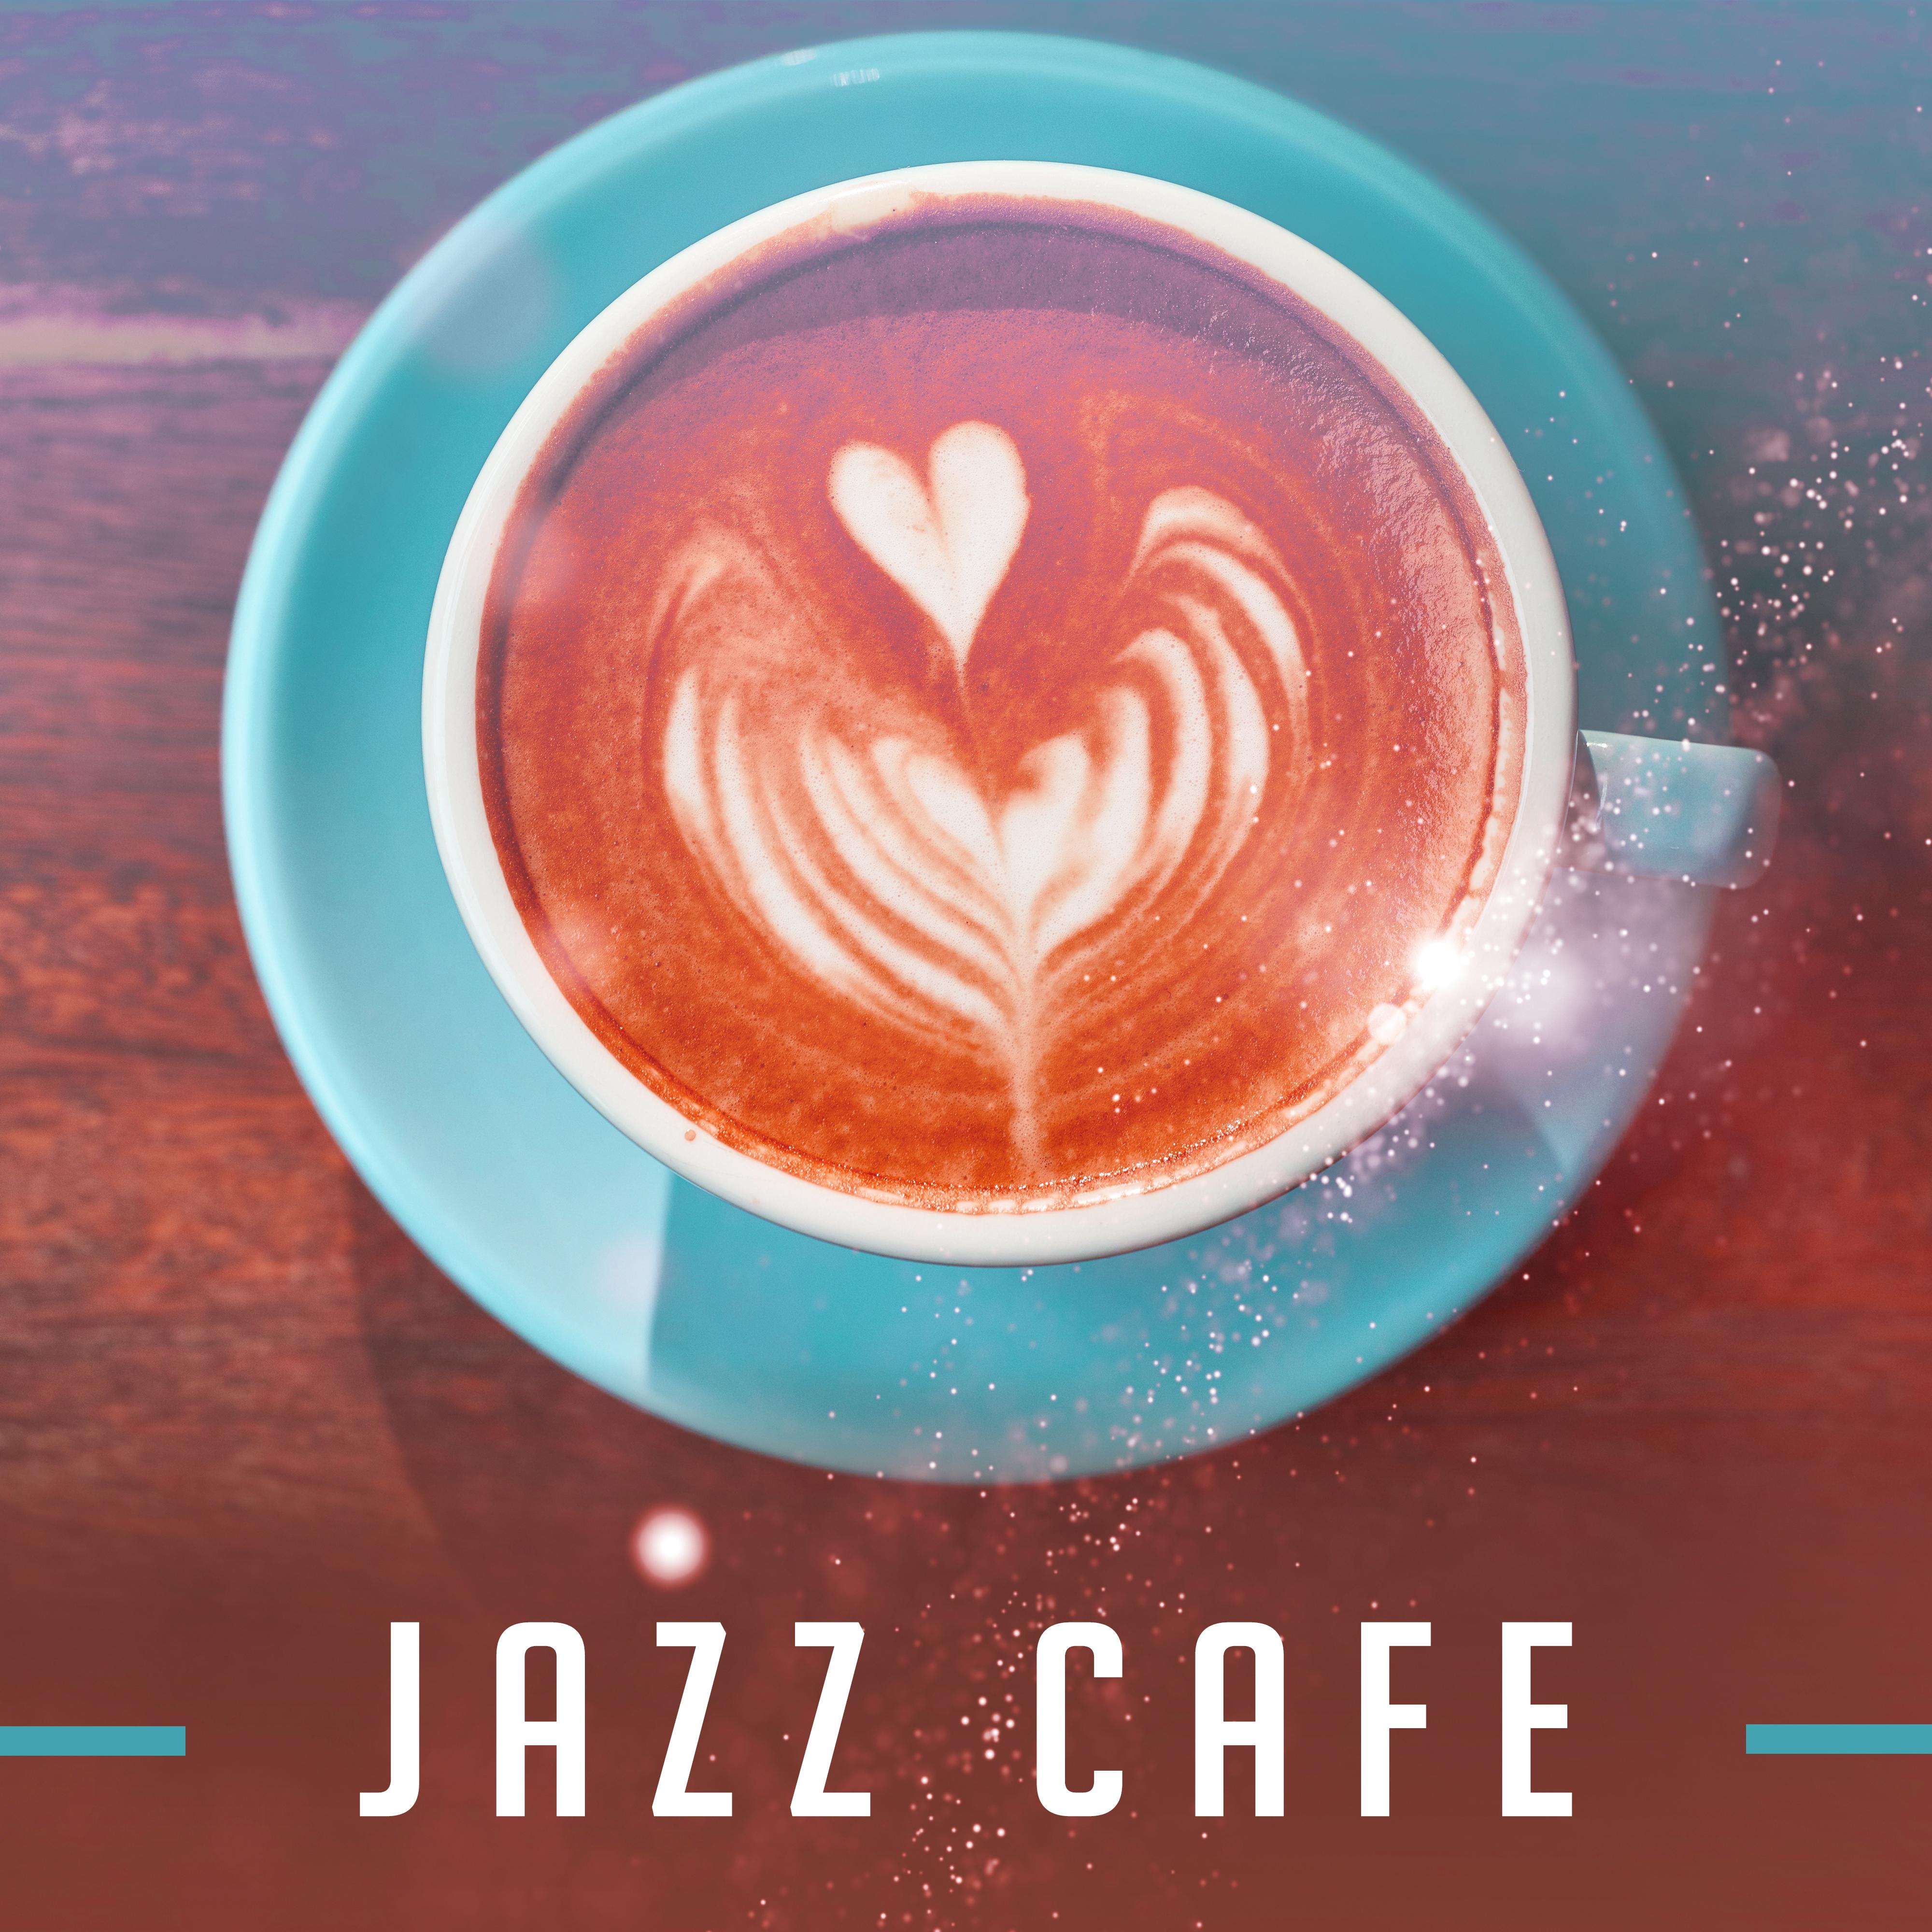 Jazz Cafe  Instrumental Music for Restaurant, Pure Relaxation, Peaceful Jazz, Calm Down, Stress Relief, Coffee Talk